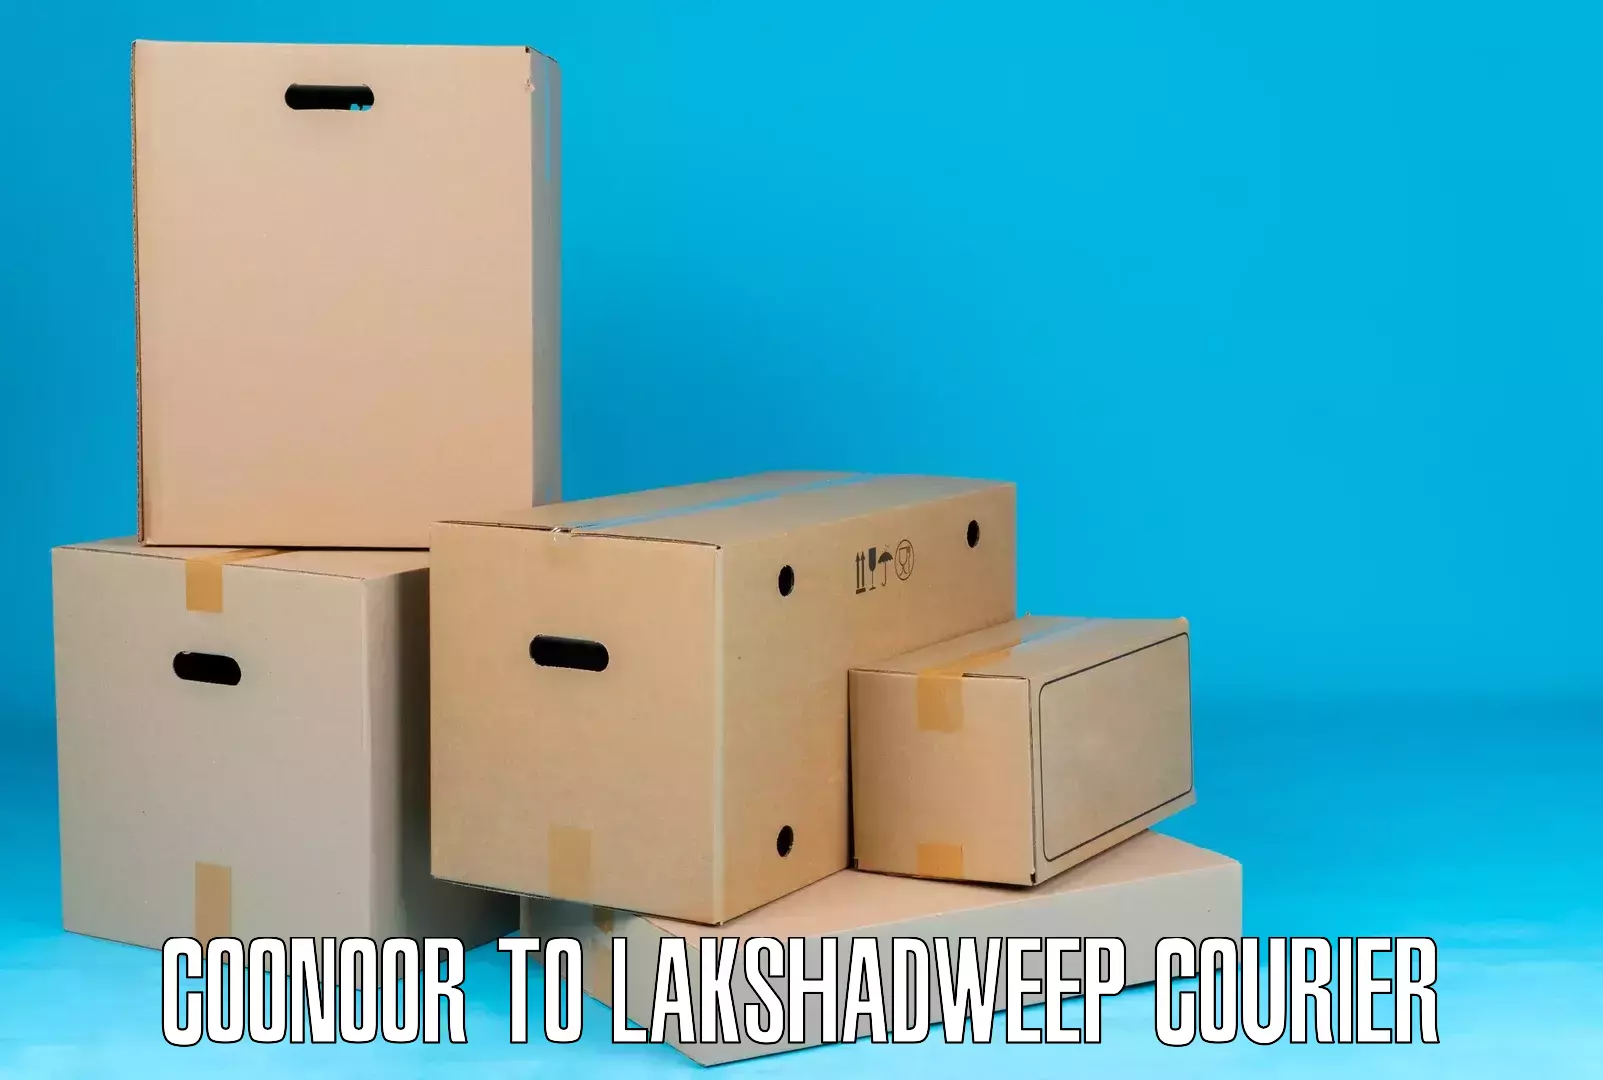 Courier service comparison Coonoor to Lakshadweep